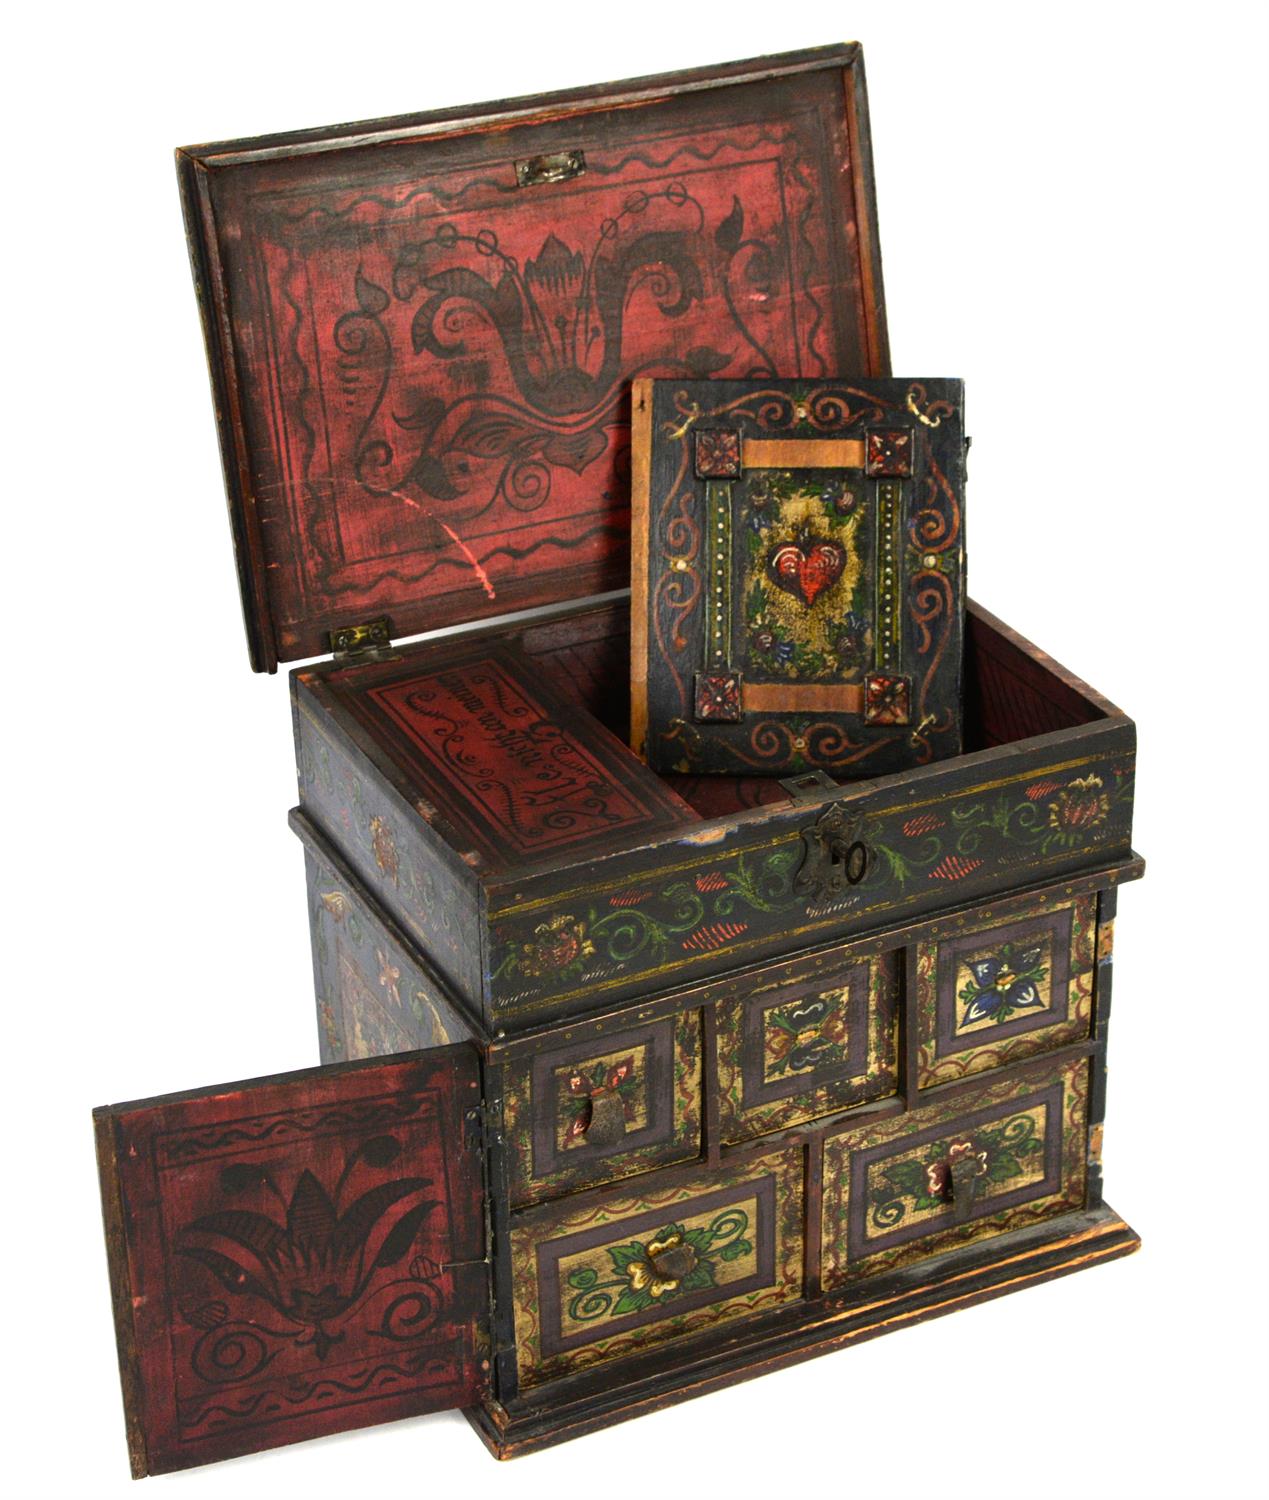 German wooden jewellery box painted with figures and flowers, with hinged lid revealing fitted